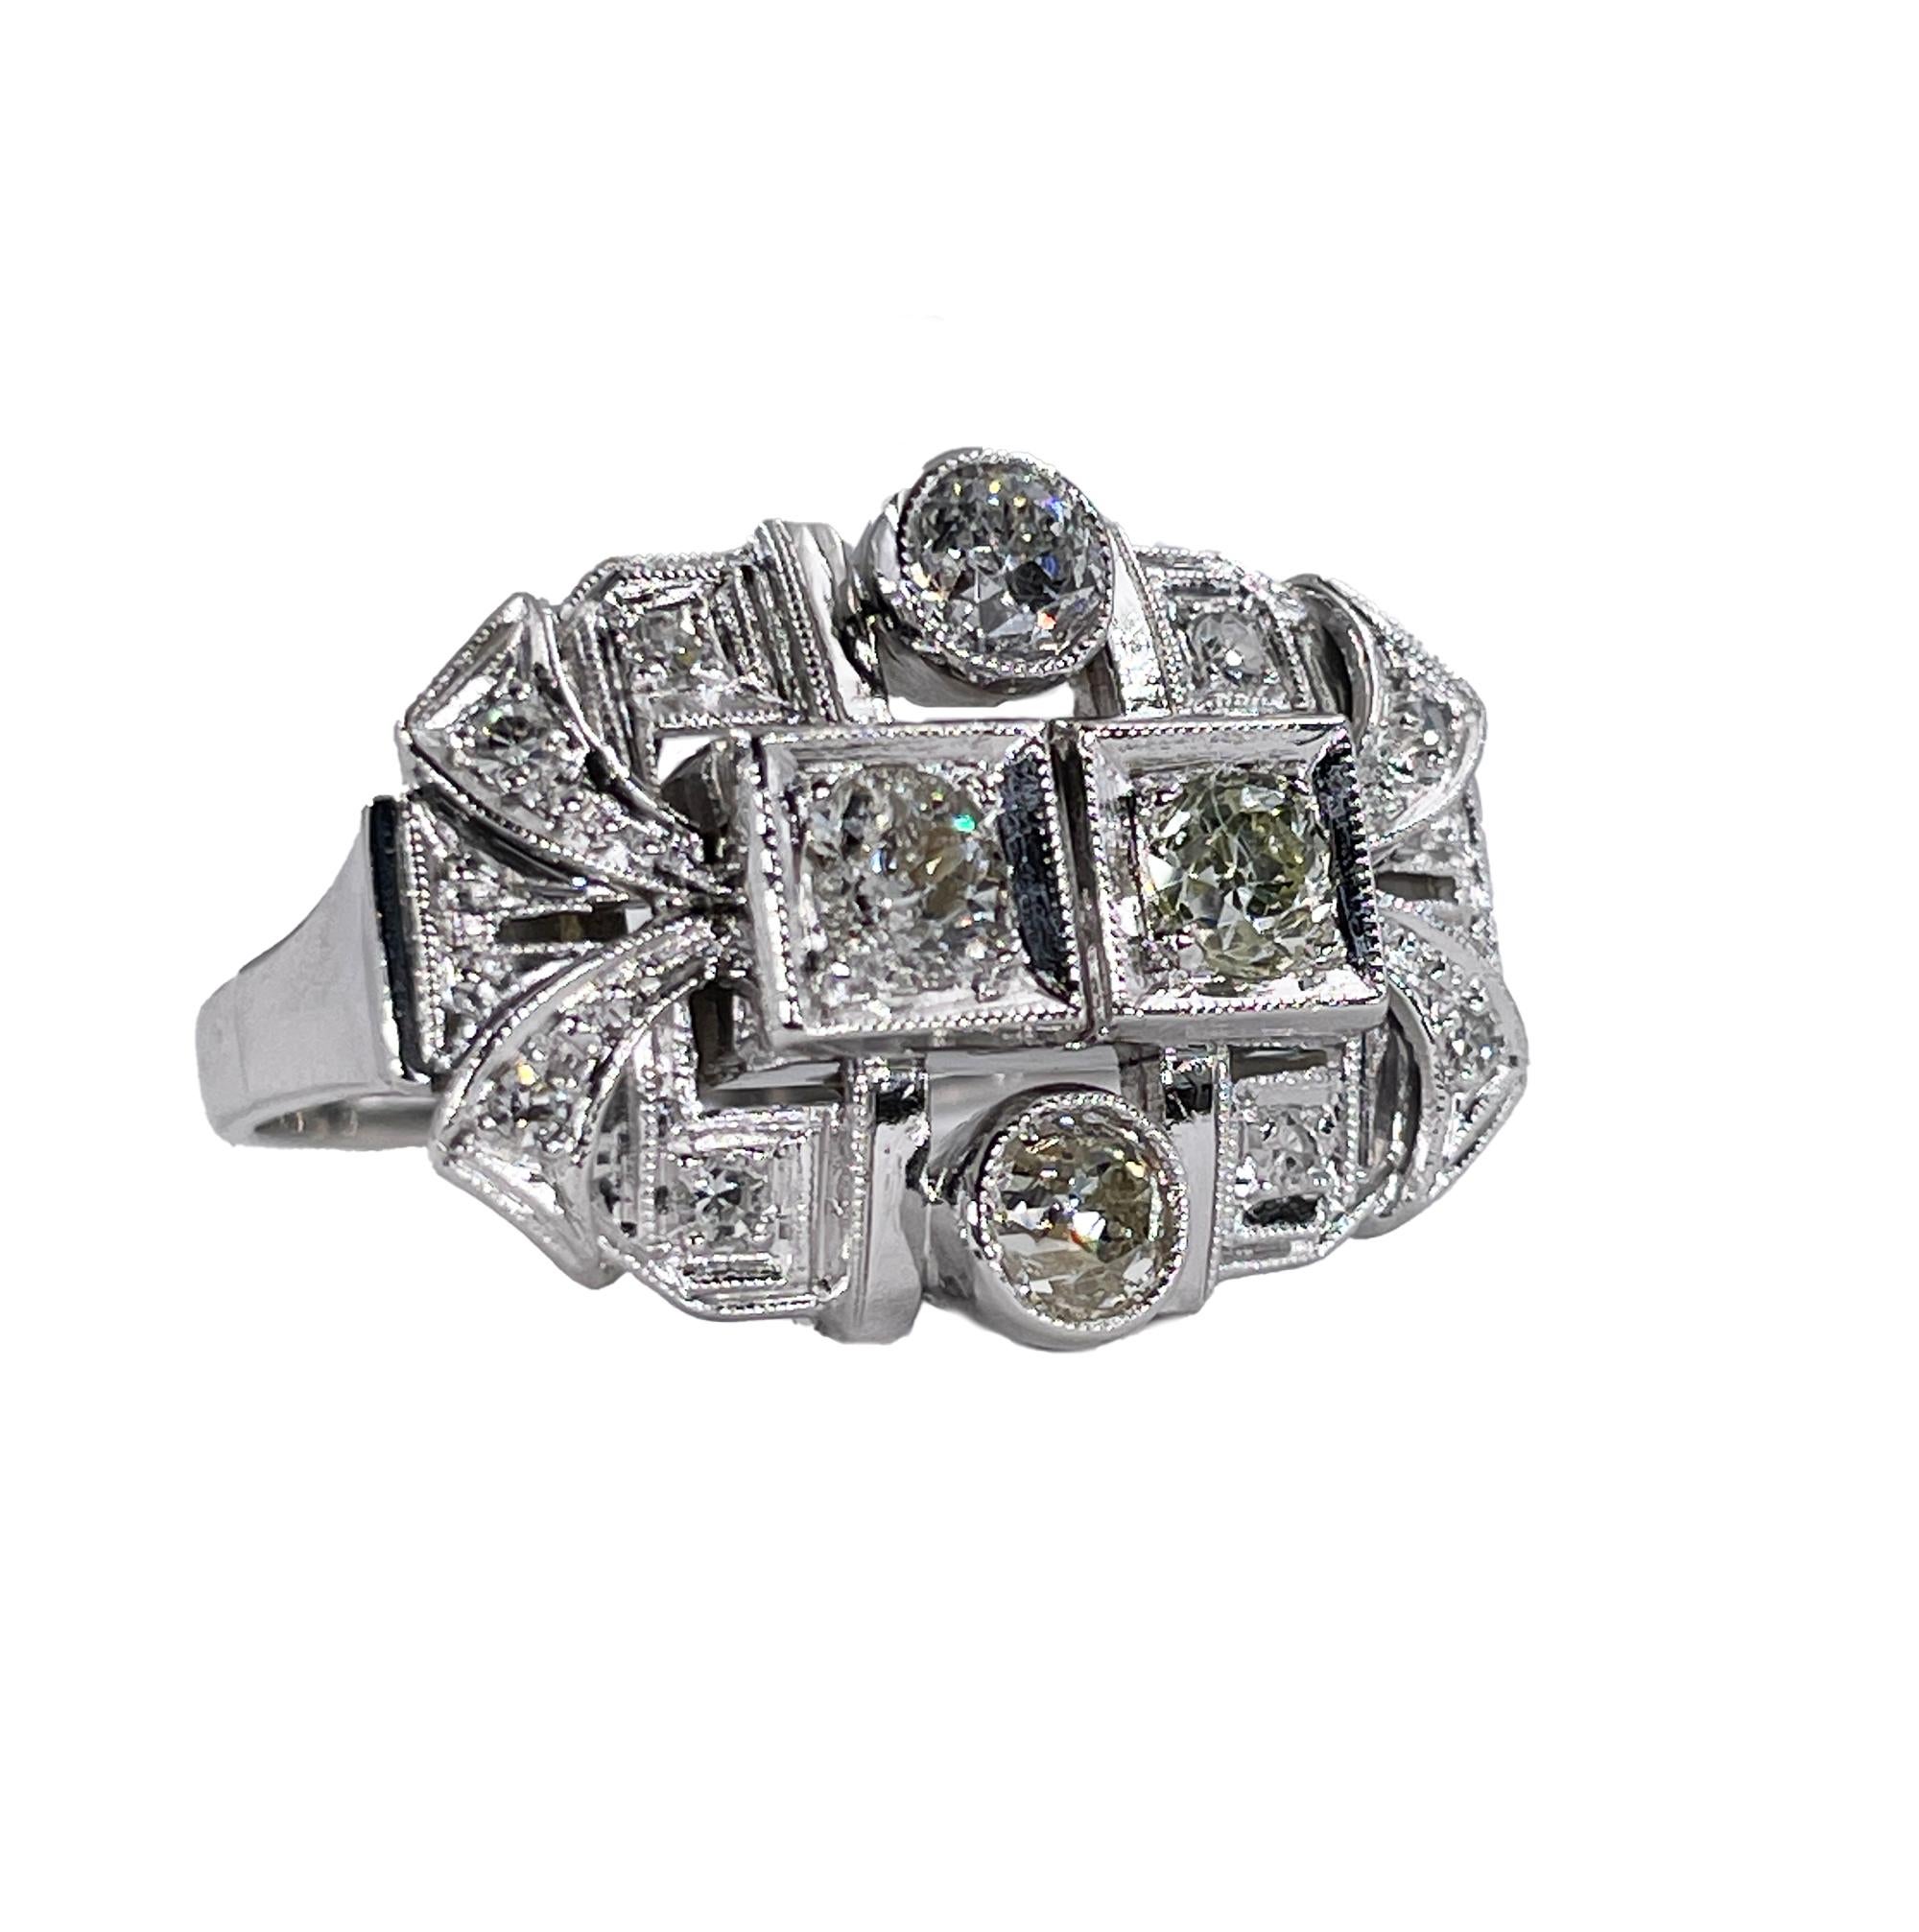 Inspired by Hollywood, created in times when Art Deco geometric meet Retro glamour. Bold and elaborate. This distinctively striking Jazz Age jewel is hand fabricated in 14k White Gold (tested), circa 1930s, impressively hugs your finger with a